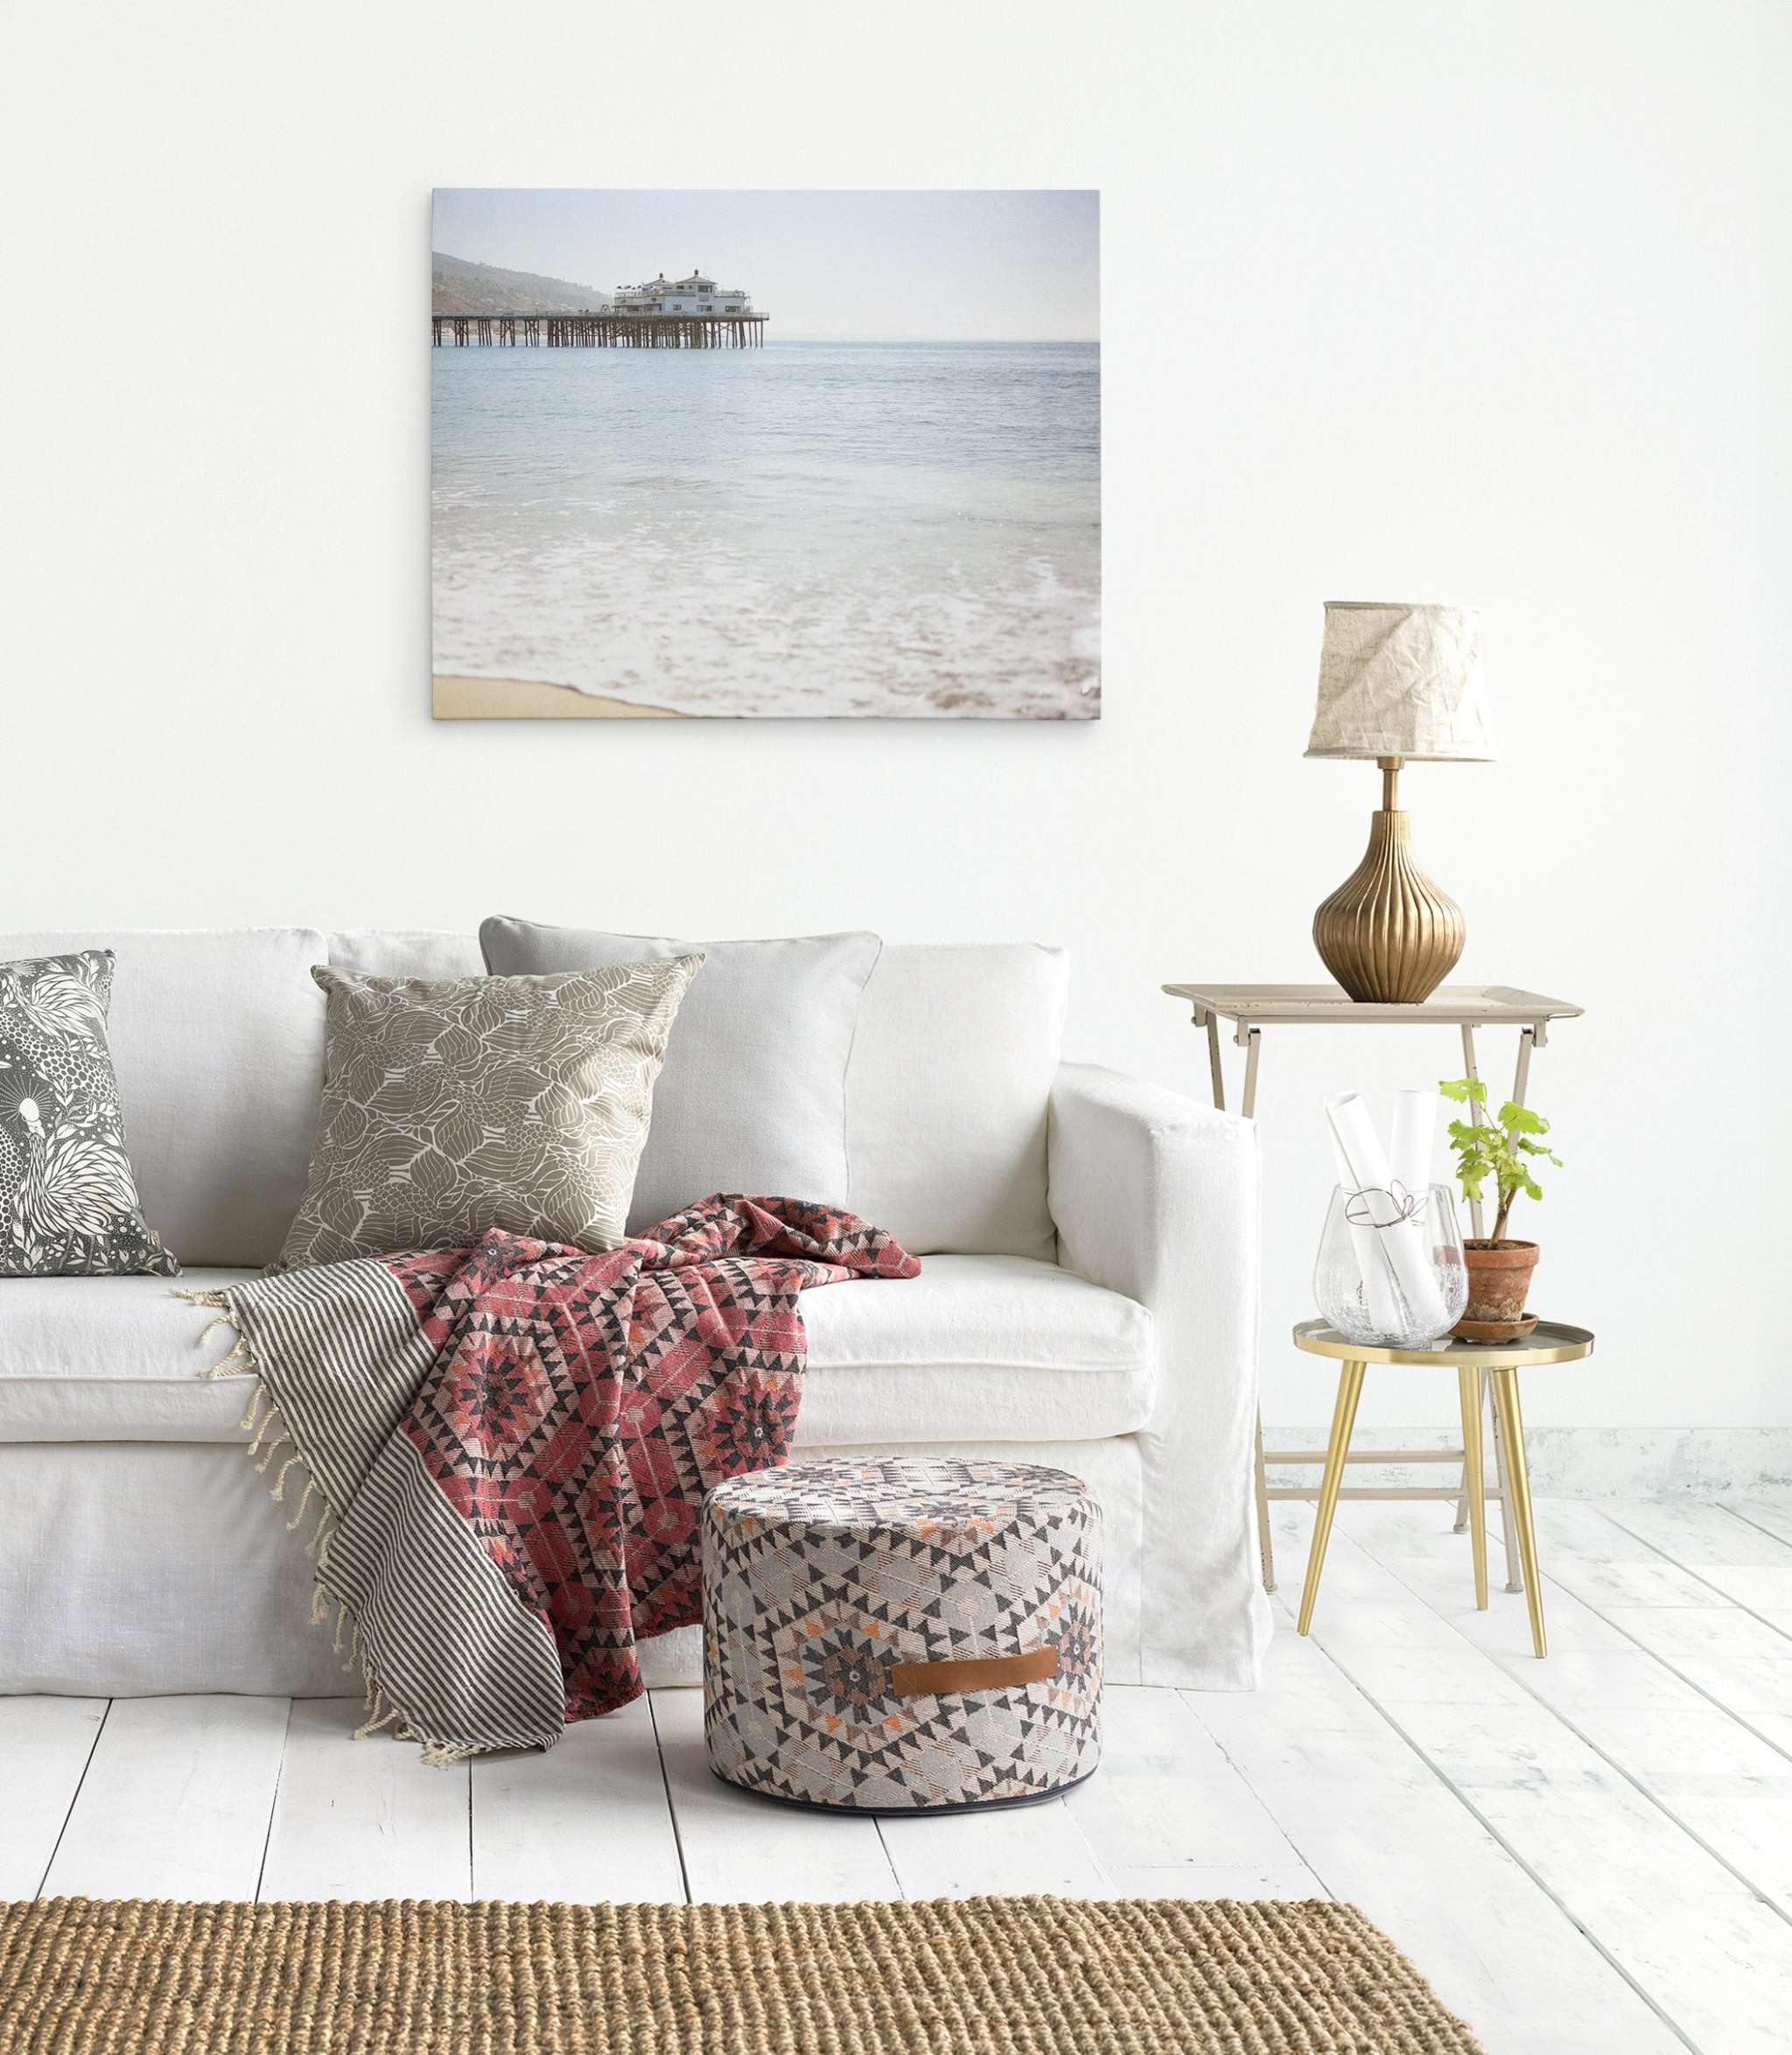 A cozy living room featuring a white sofa with assorted cushions, a patterned ottoman, wooden floor lamp, side table with a plant, and a large Offley Green Malibu Pier Wall Art on the wall.